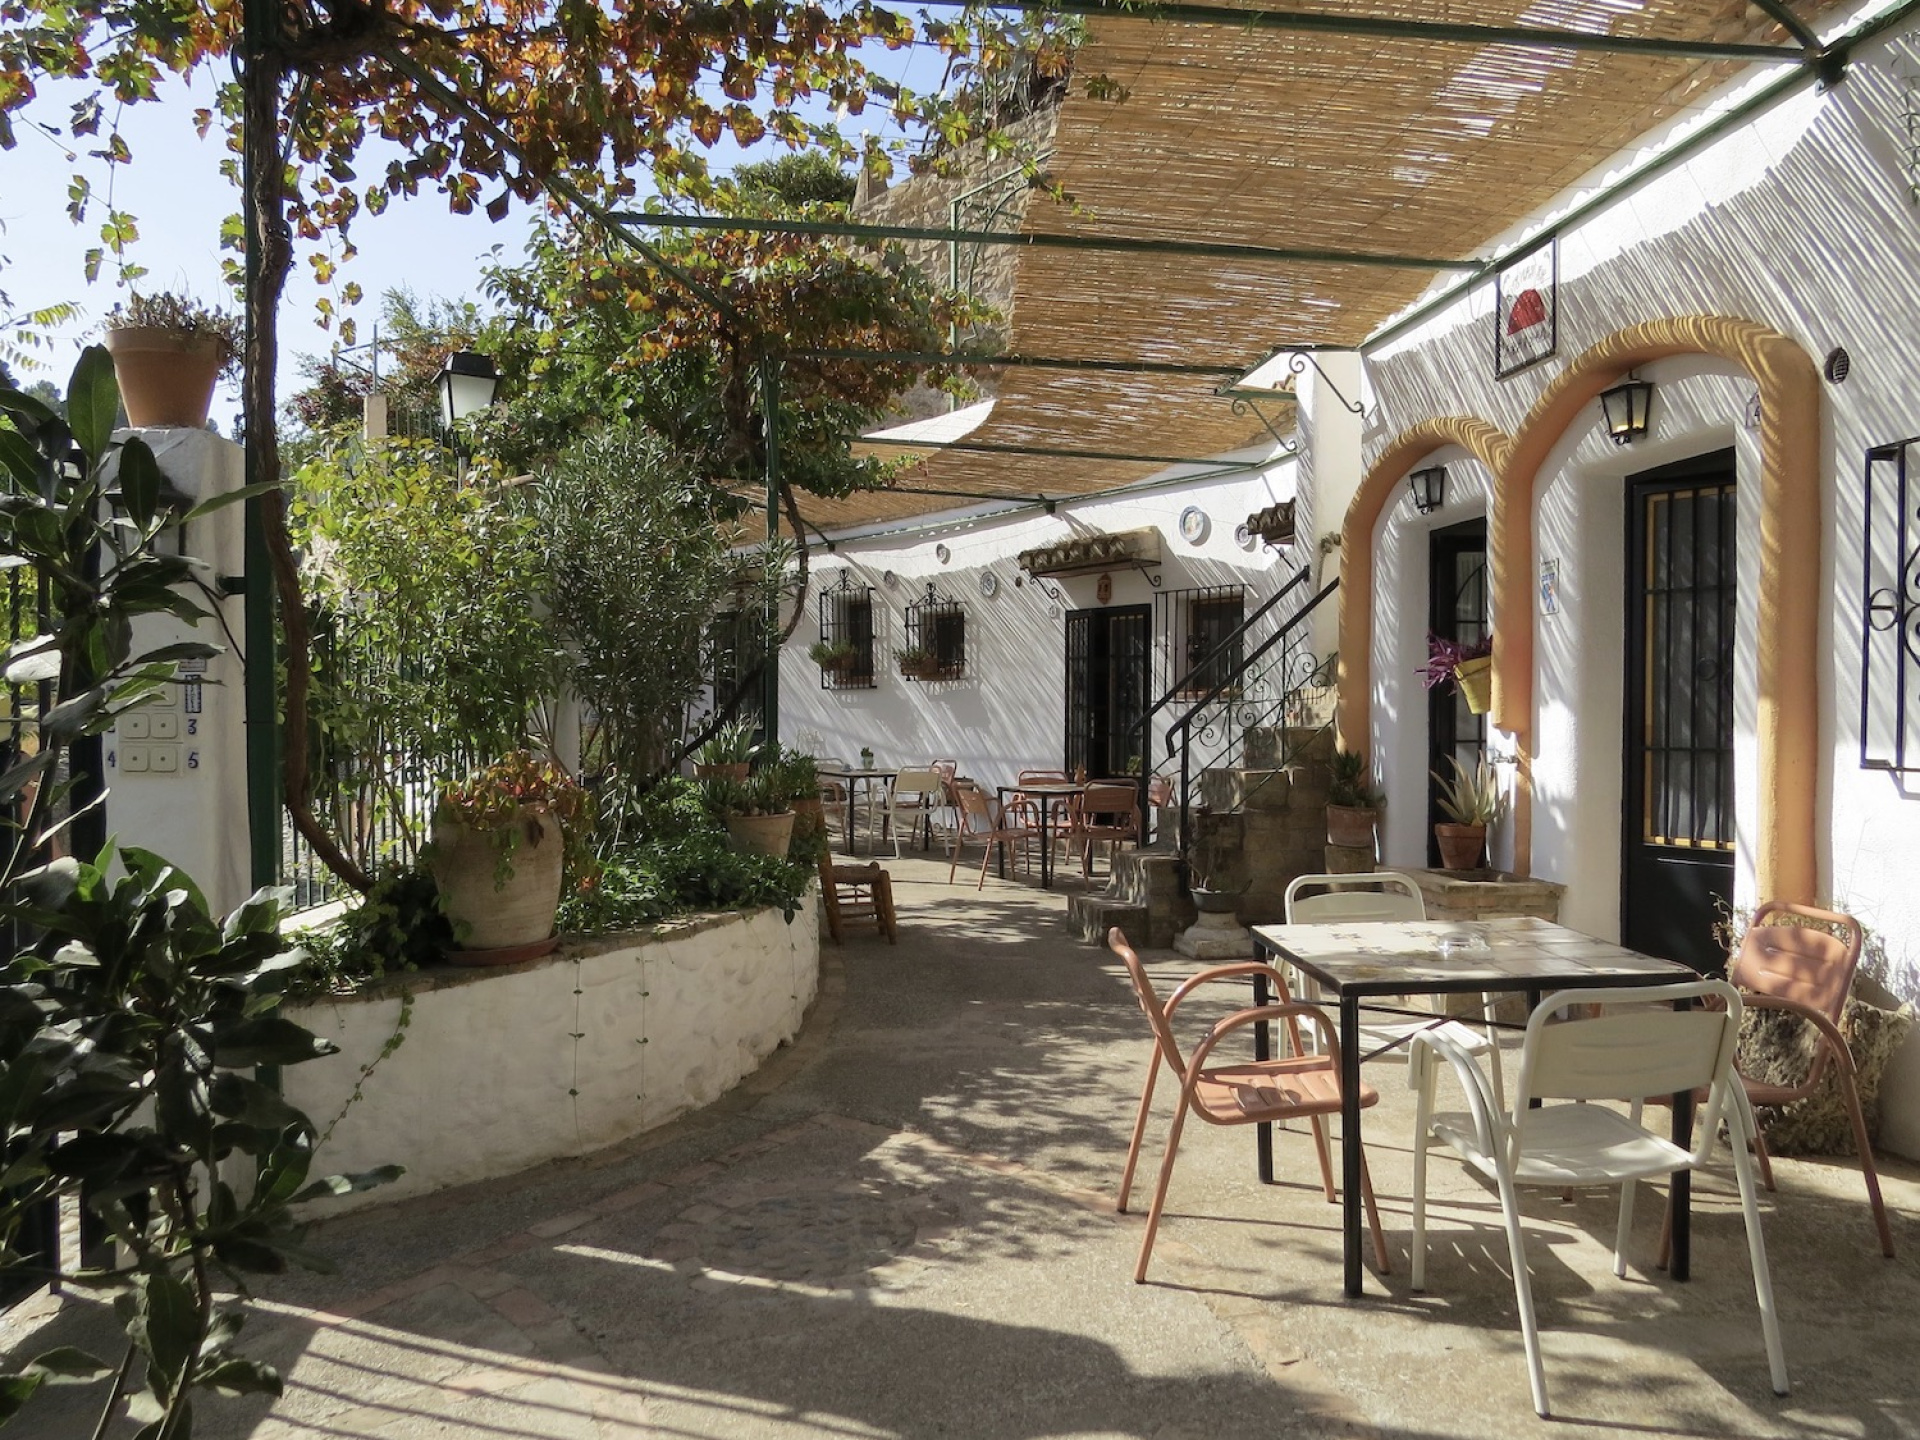 Holiday Lets & Owner Accommodation, Sacromonte